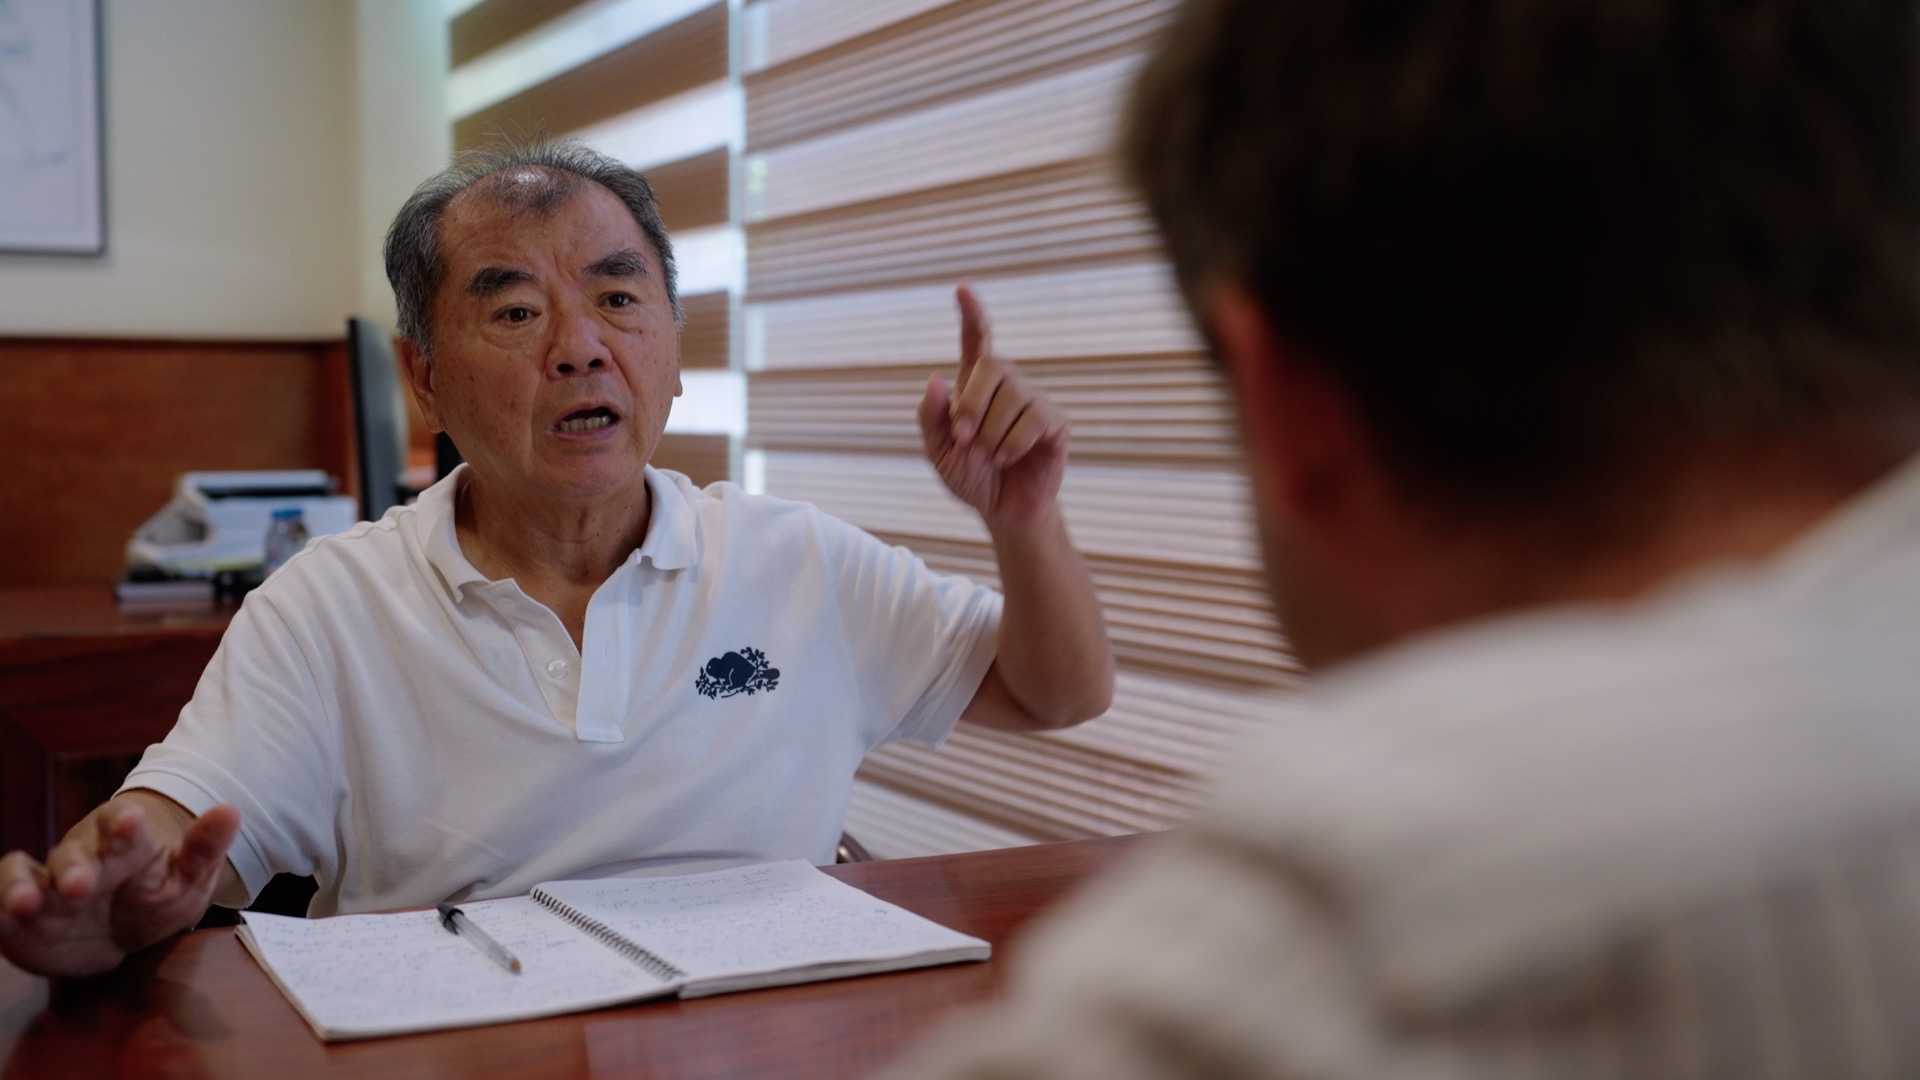 Lu Chu Chang, director of Think Biotech, vehemently denied involvement in illegally felling trees in Prey Lang Wildlife Sanctuary during his interview with Mongabay in June 2023. Image by Chasing Deforestation / Mongabay.